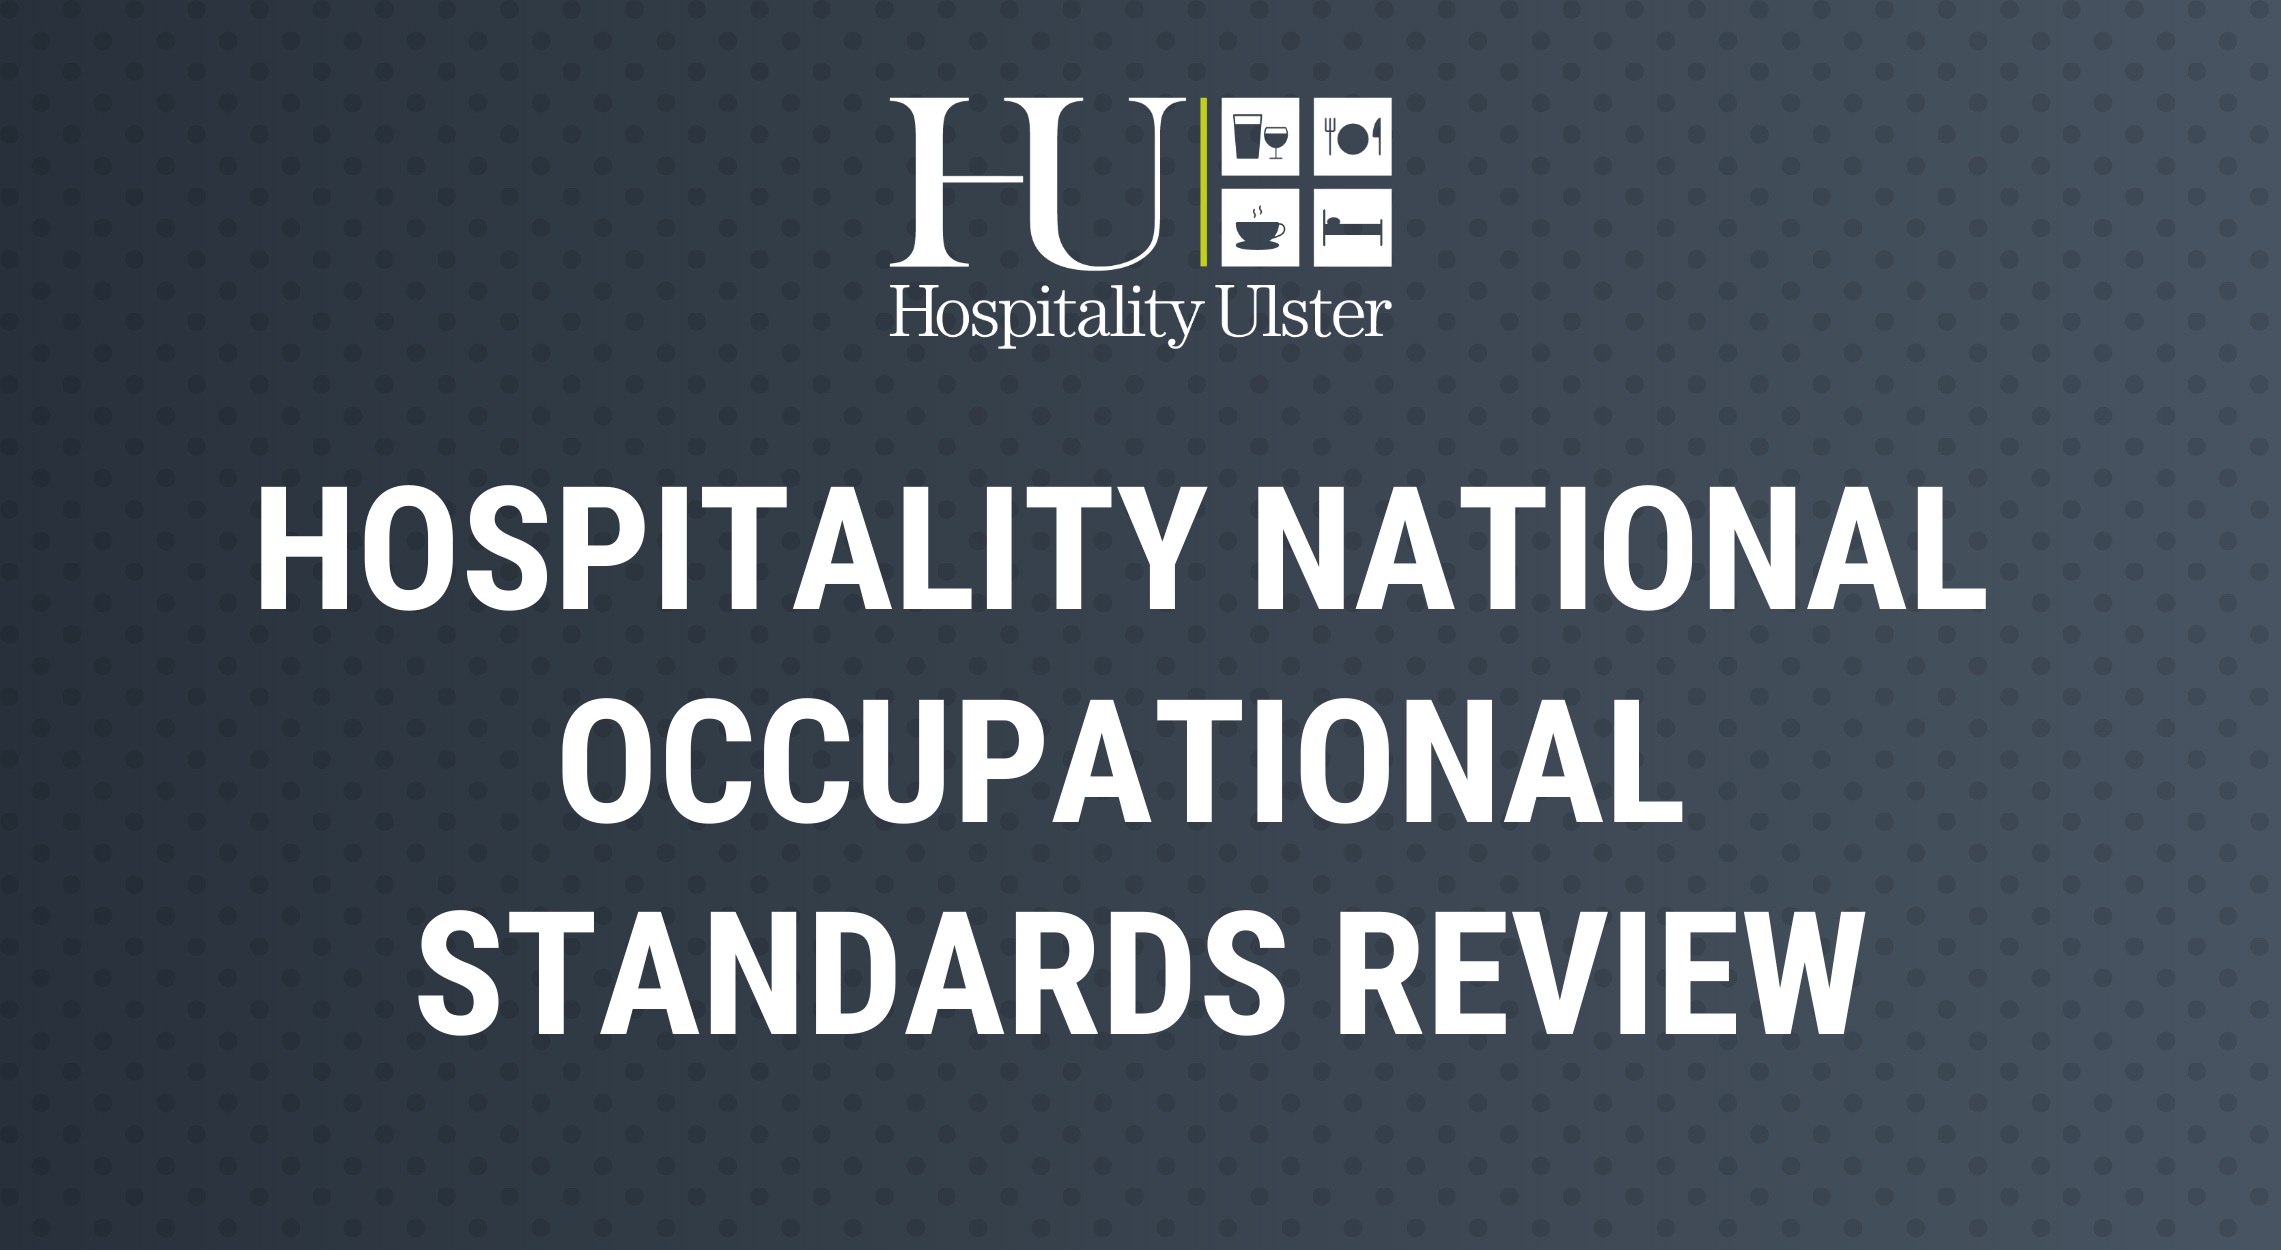 HOSPITALITY NATIONAL OCCUPATIONAL STANDARDS REVIEW